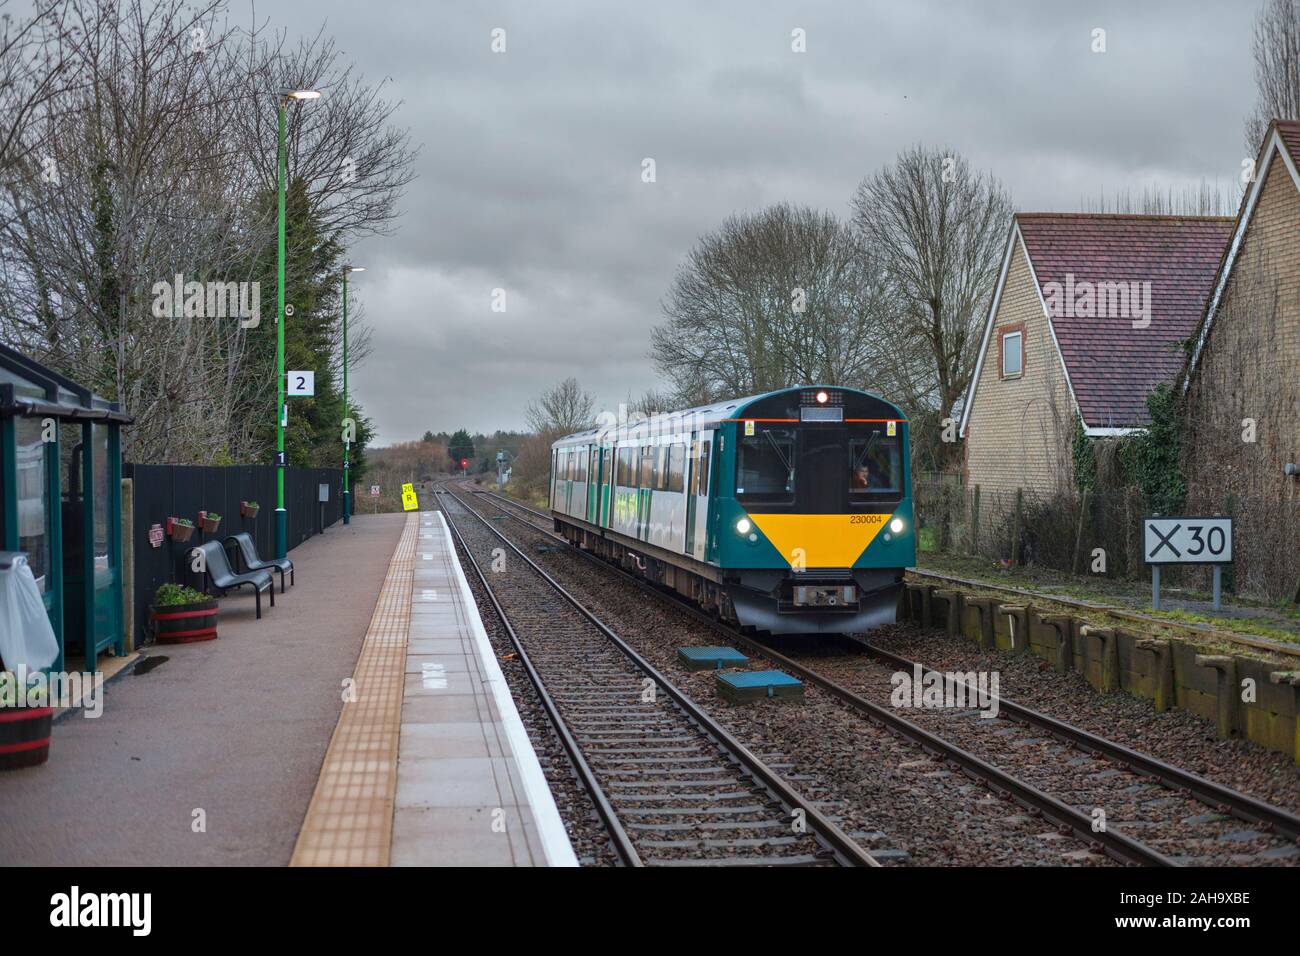 West Midlands Railway Vivarail class 230 230004 at Lidlington on the Bedford - Bletchley Marston vale line Stock Photo